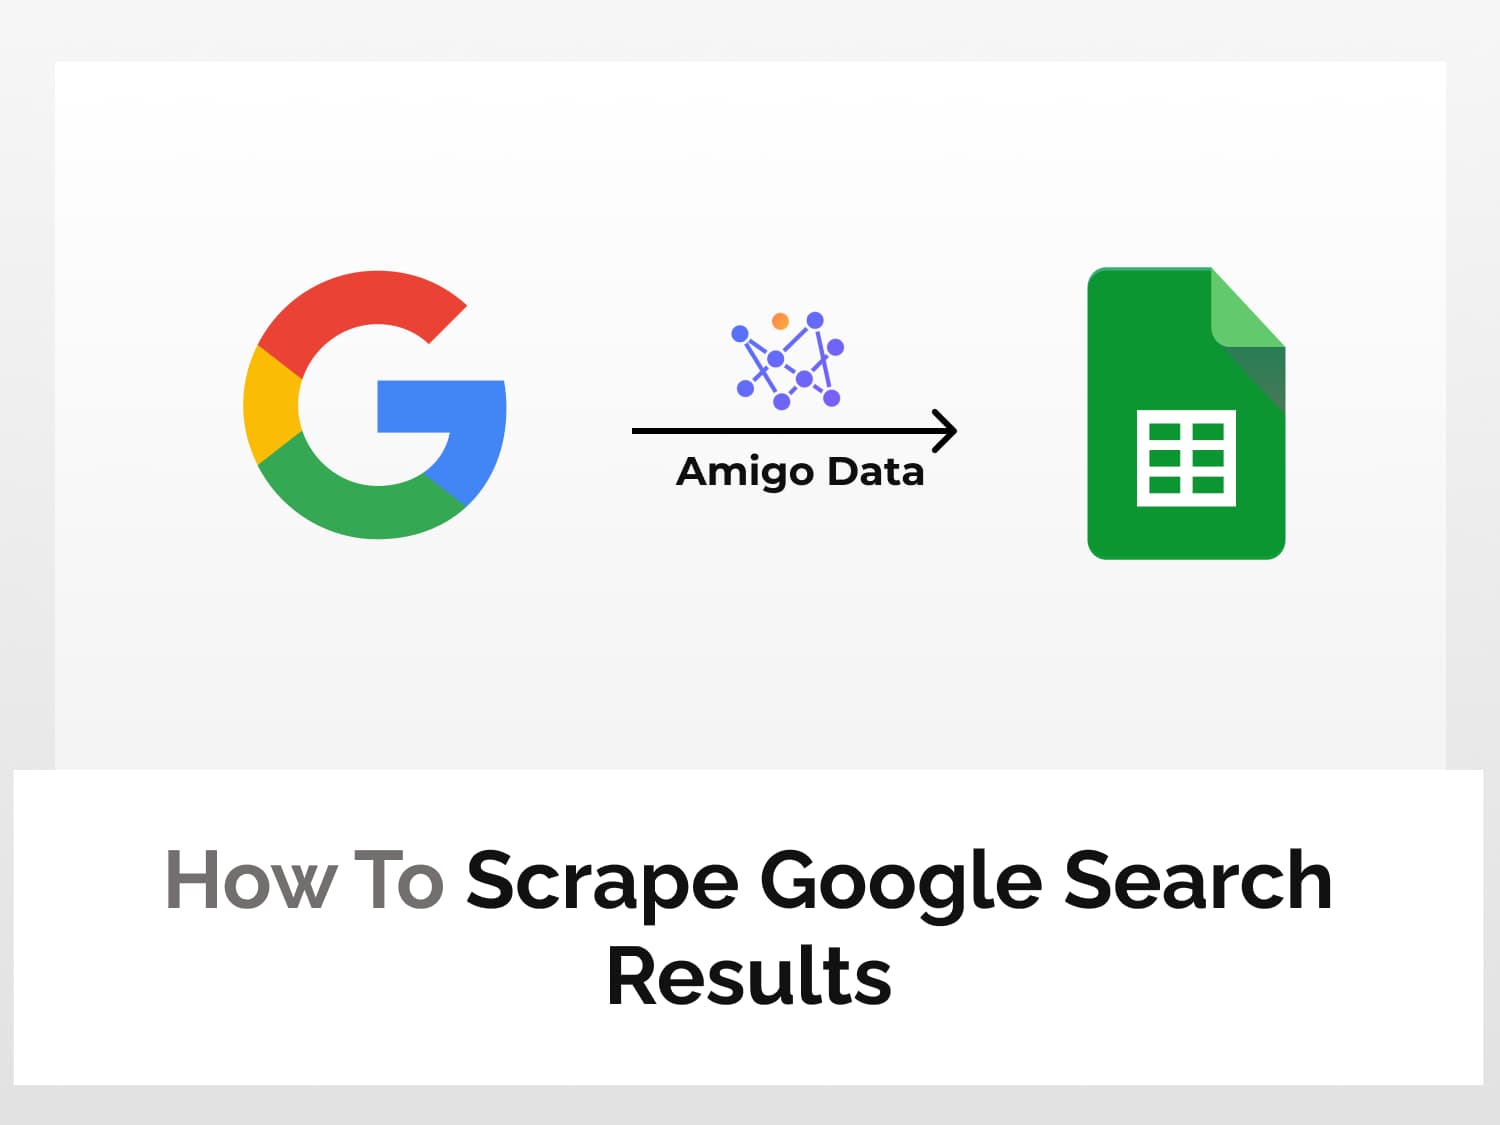 How to scrape Google Search results